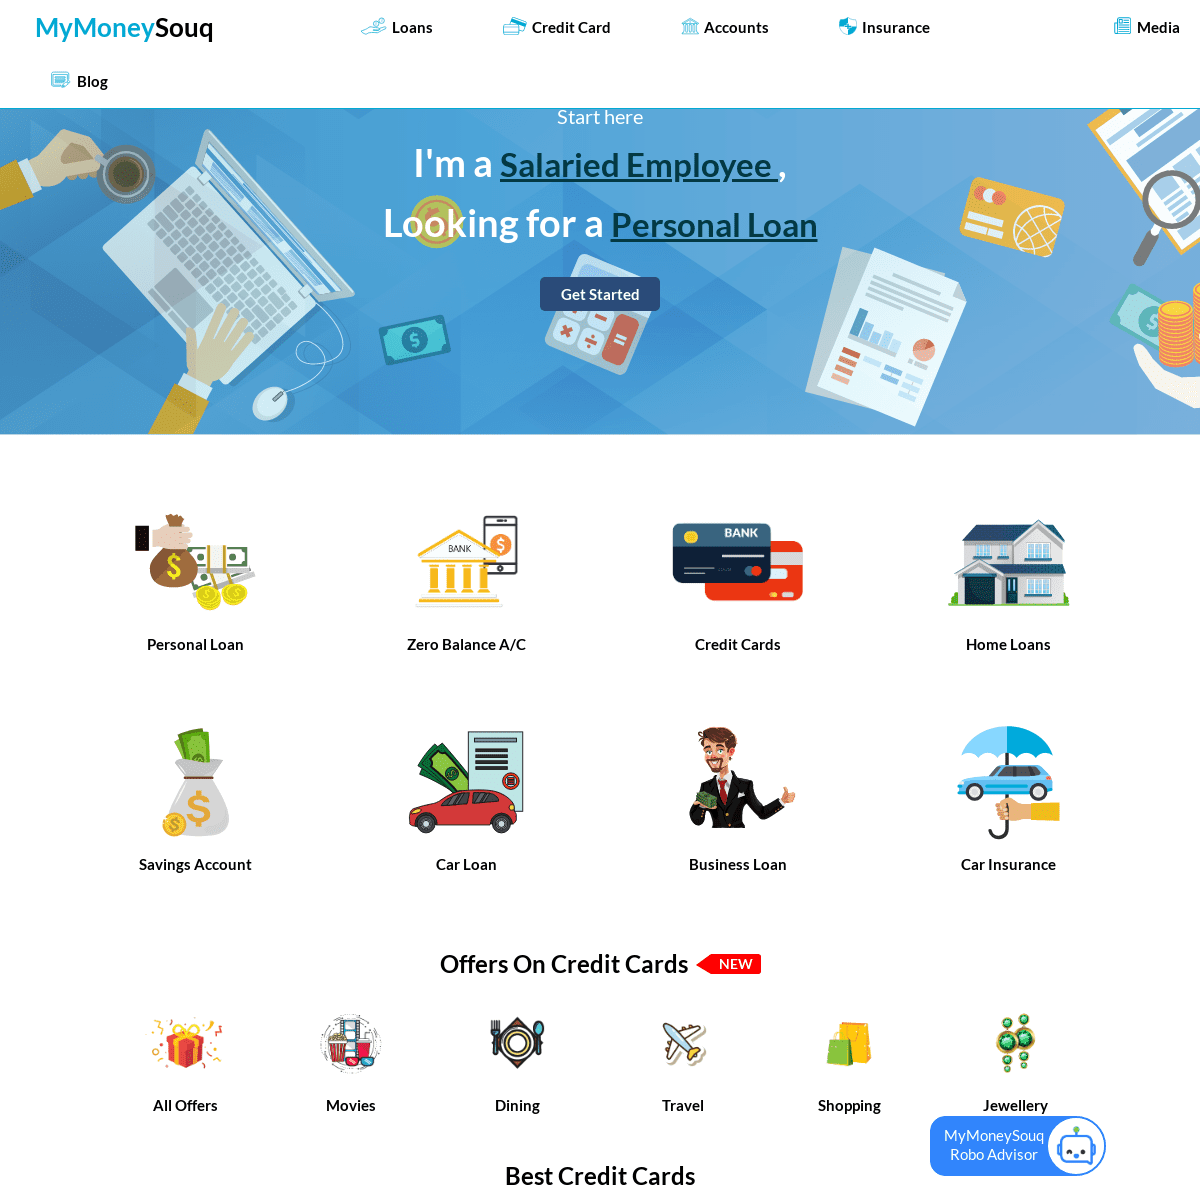 MyMoneySouq | Compare Loans, Insurance, Credit Cards & Bank Accounts in UAE